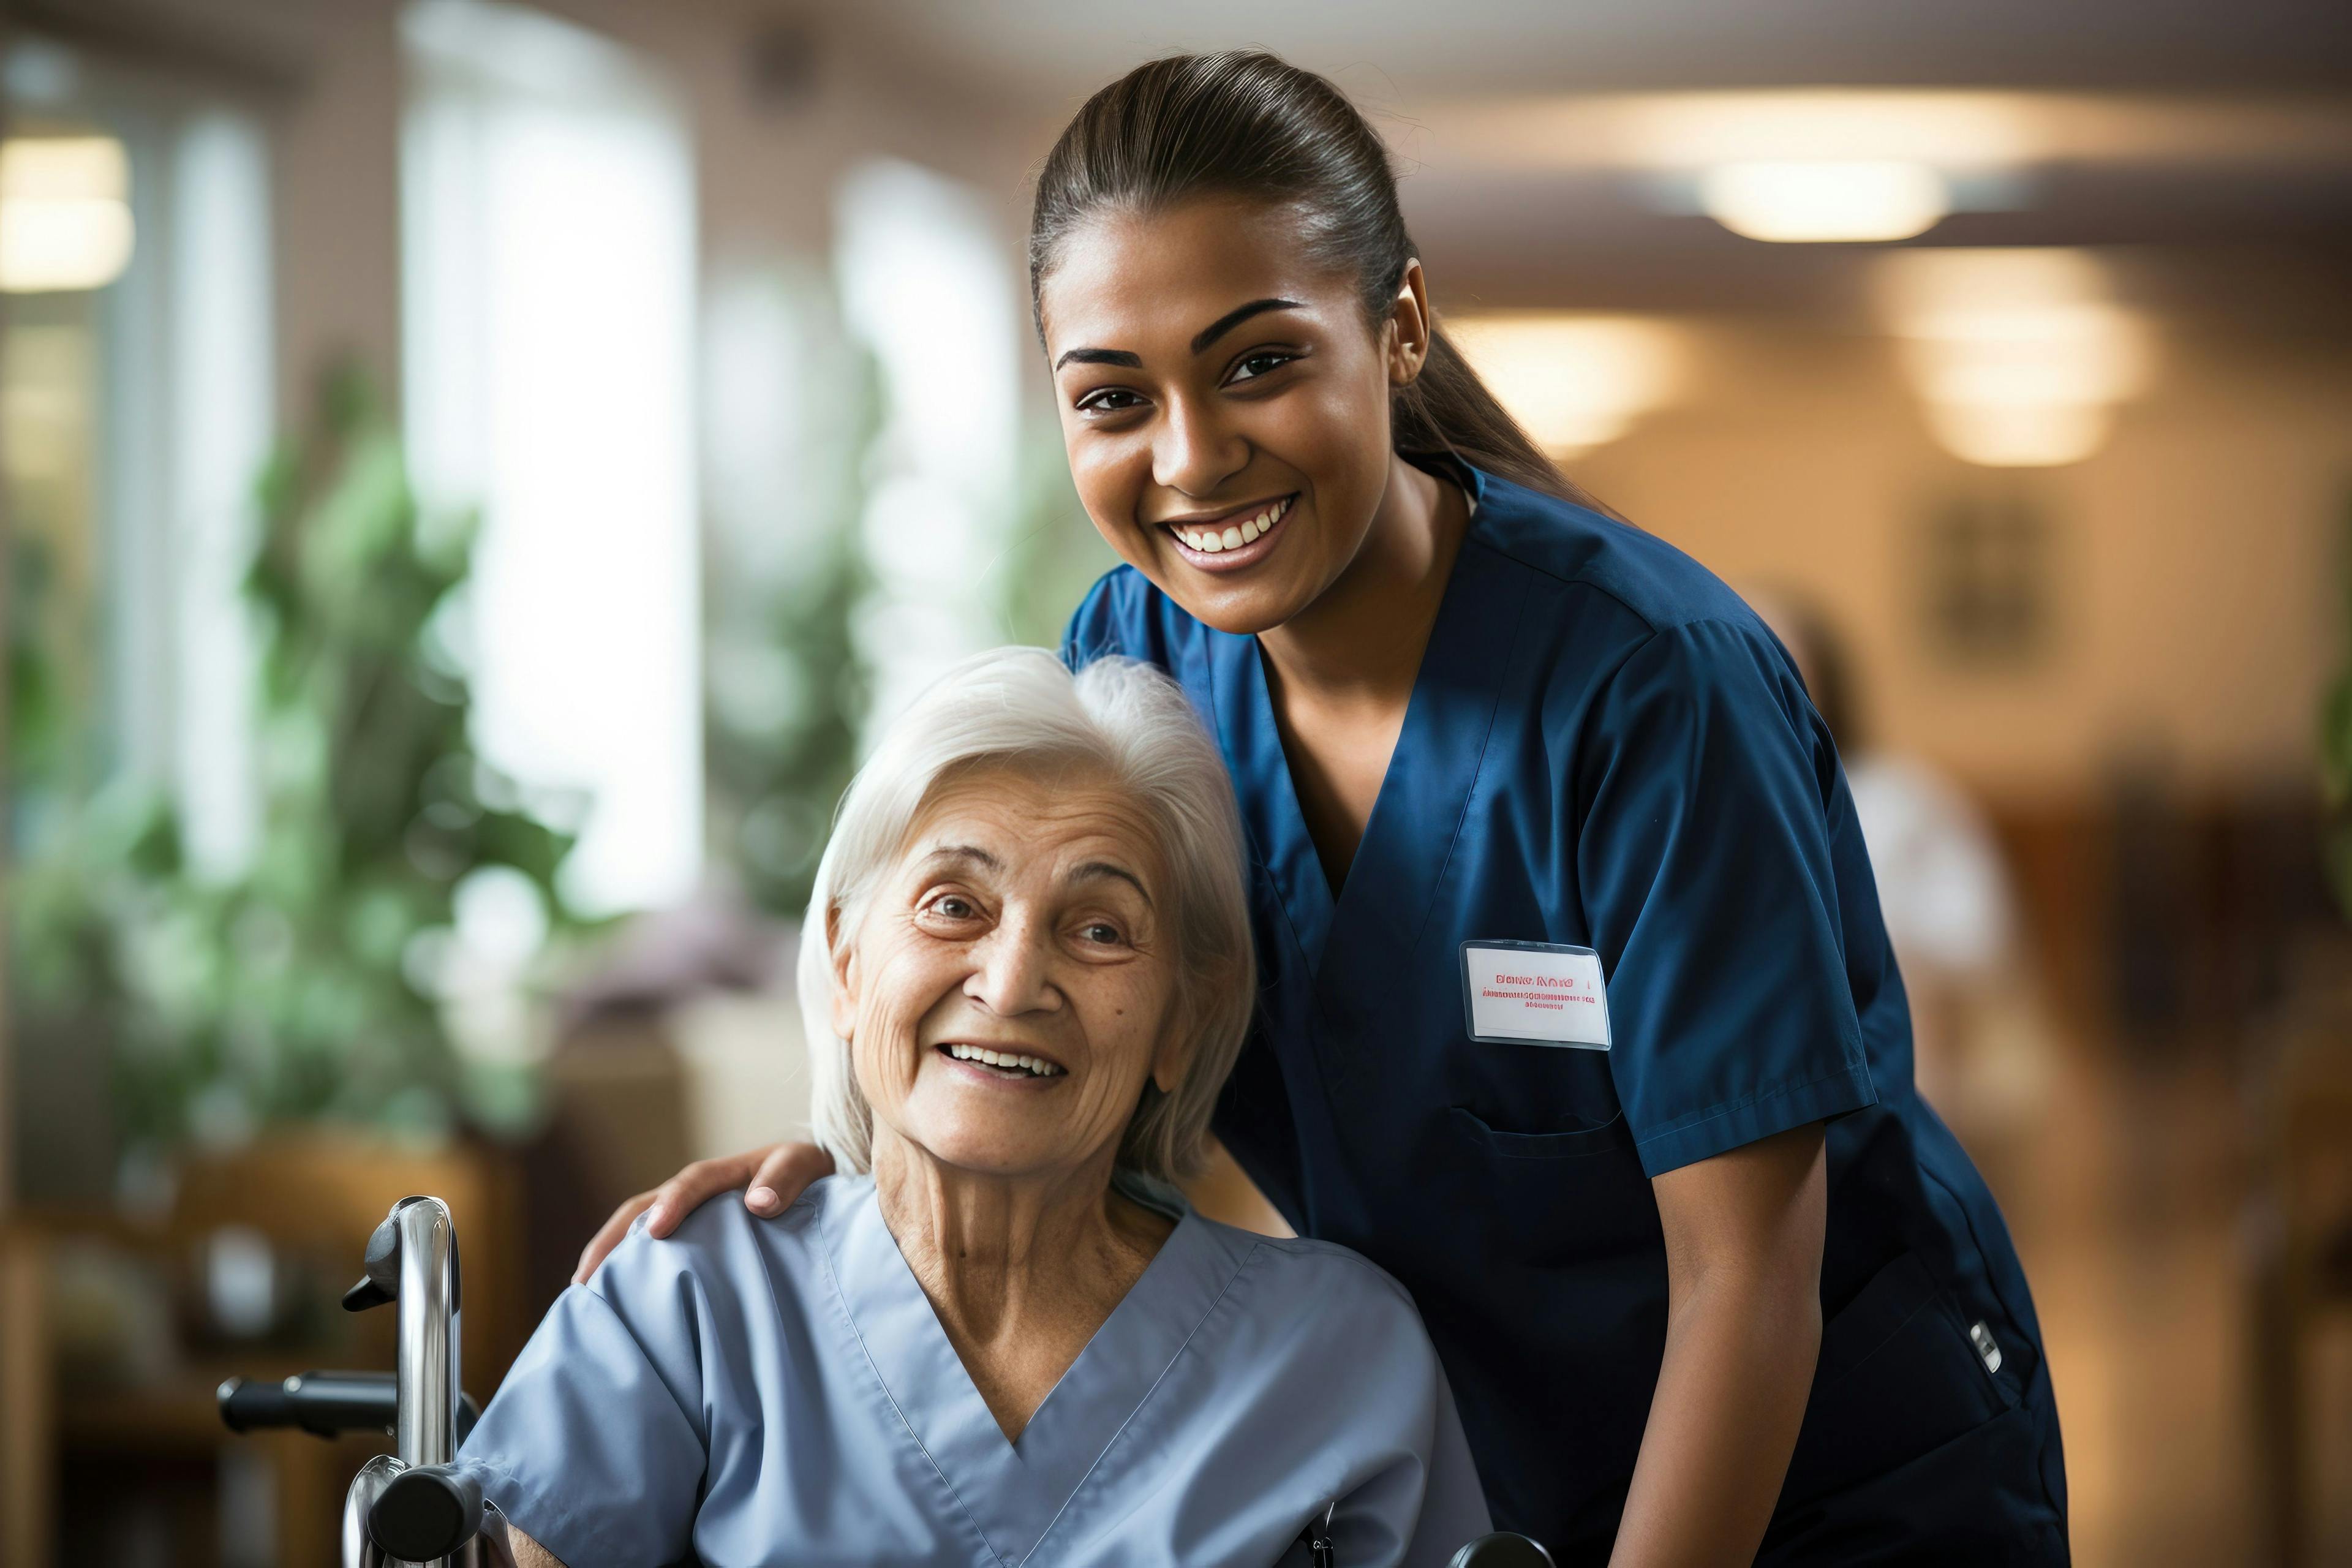 Senior woman and her female caretaker in a nursing home smiling